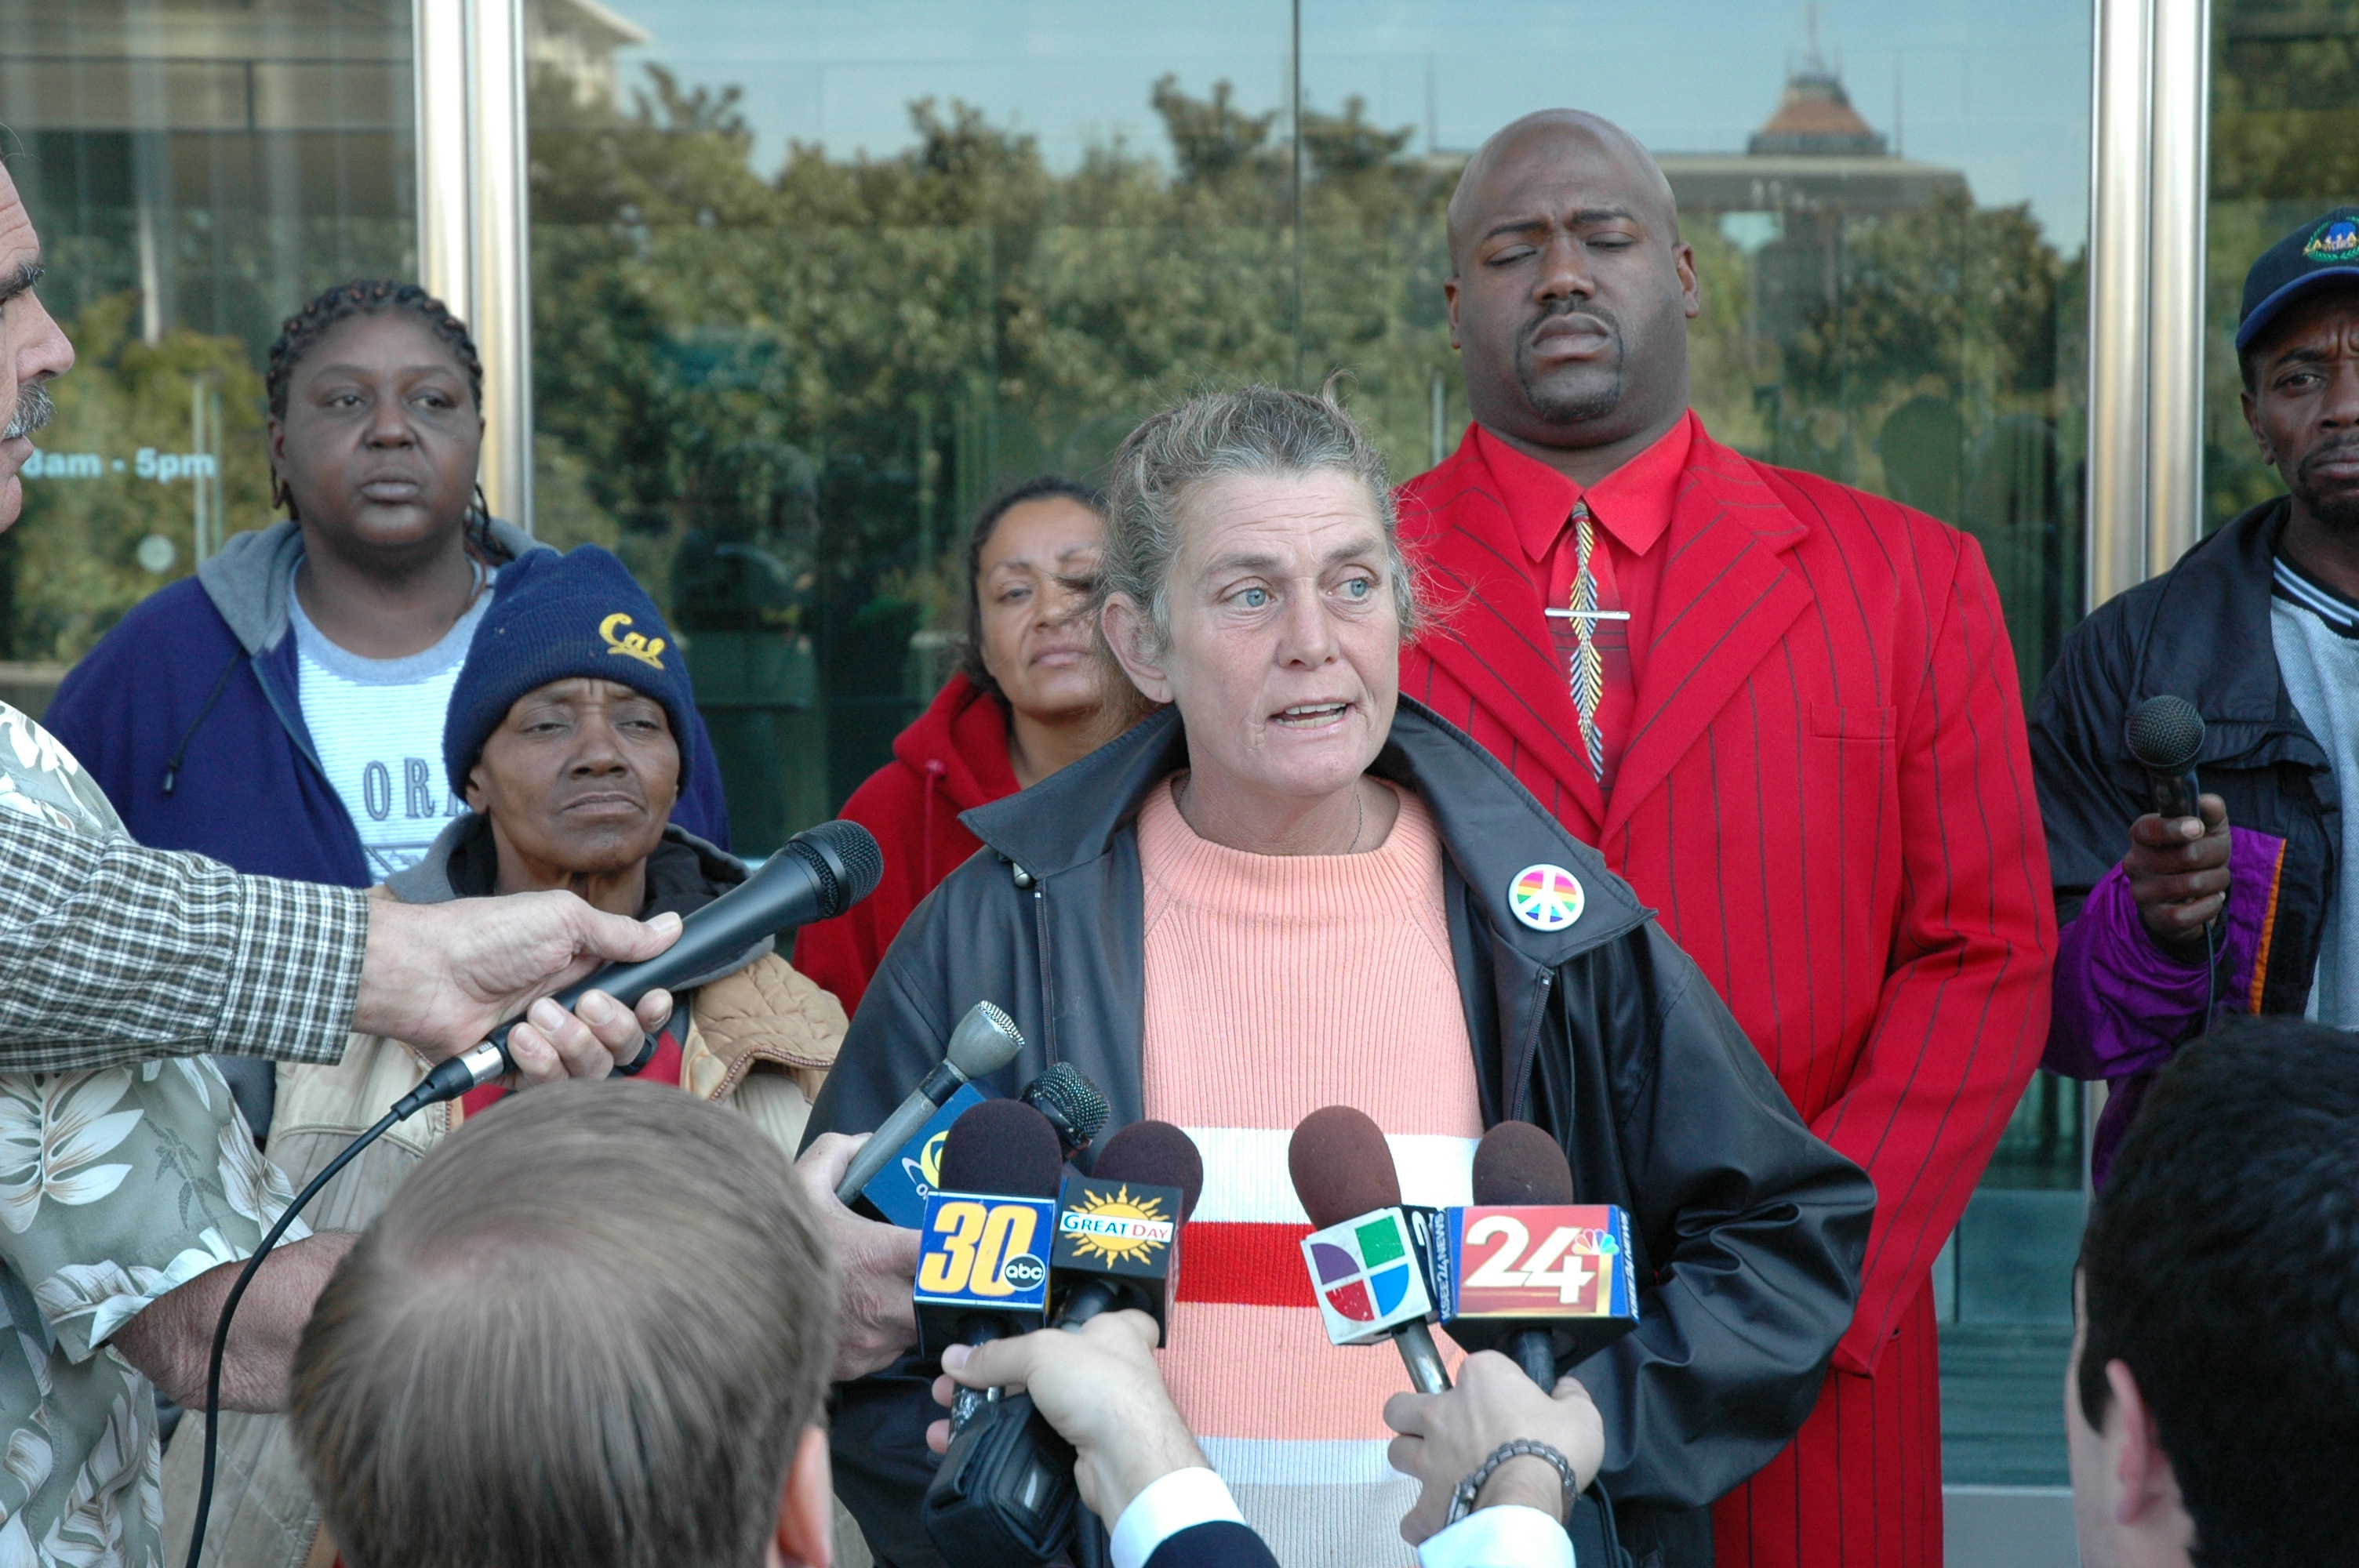 Pam Kincaid spoke at the press conference announcing the lawsuit against the City of Fresno. Kincaid was the lead plaintiff in the lawsuit.